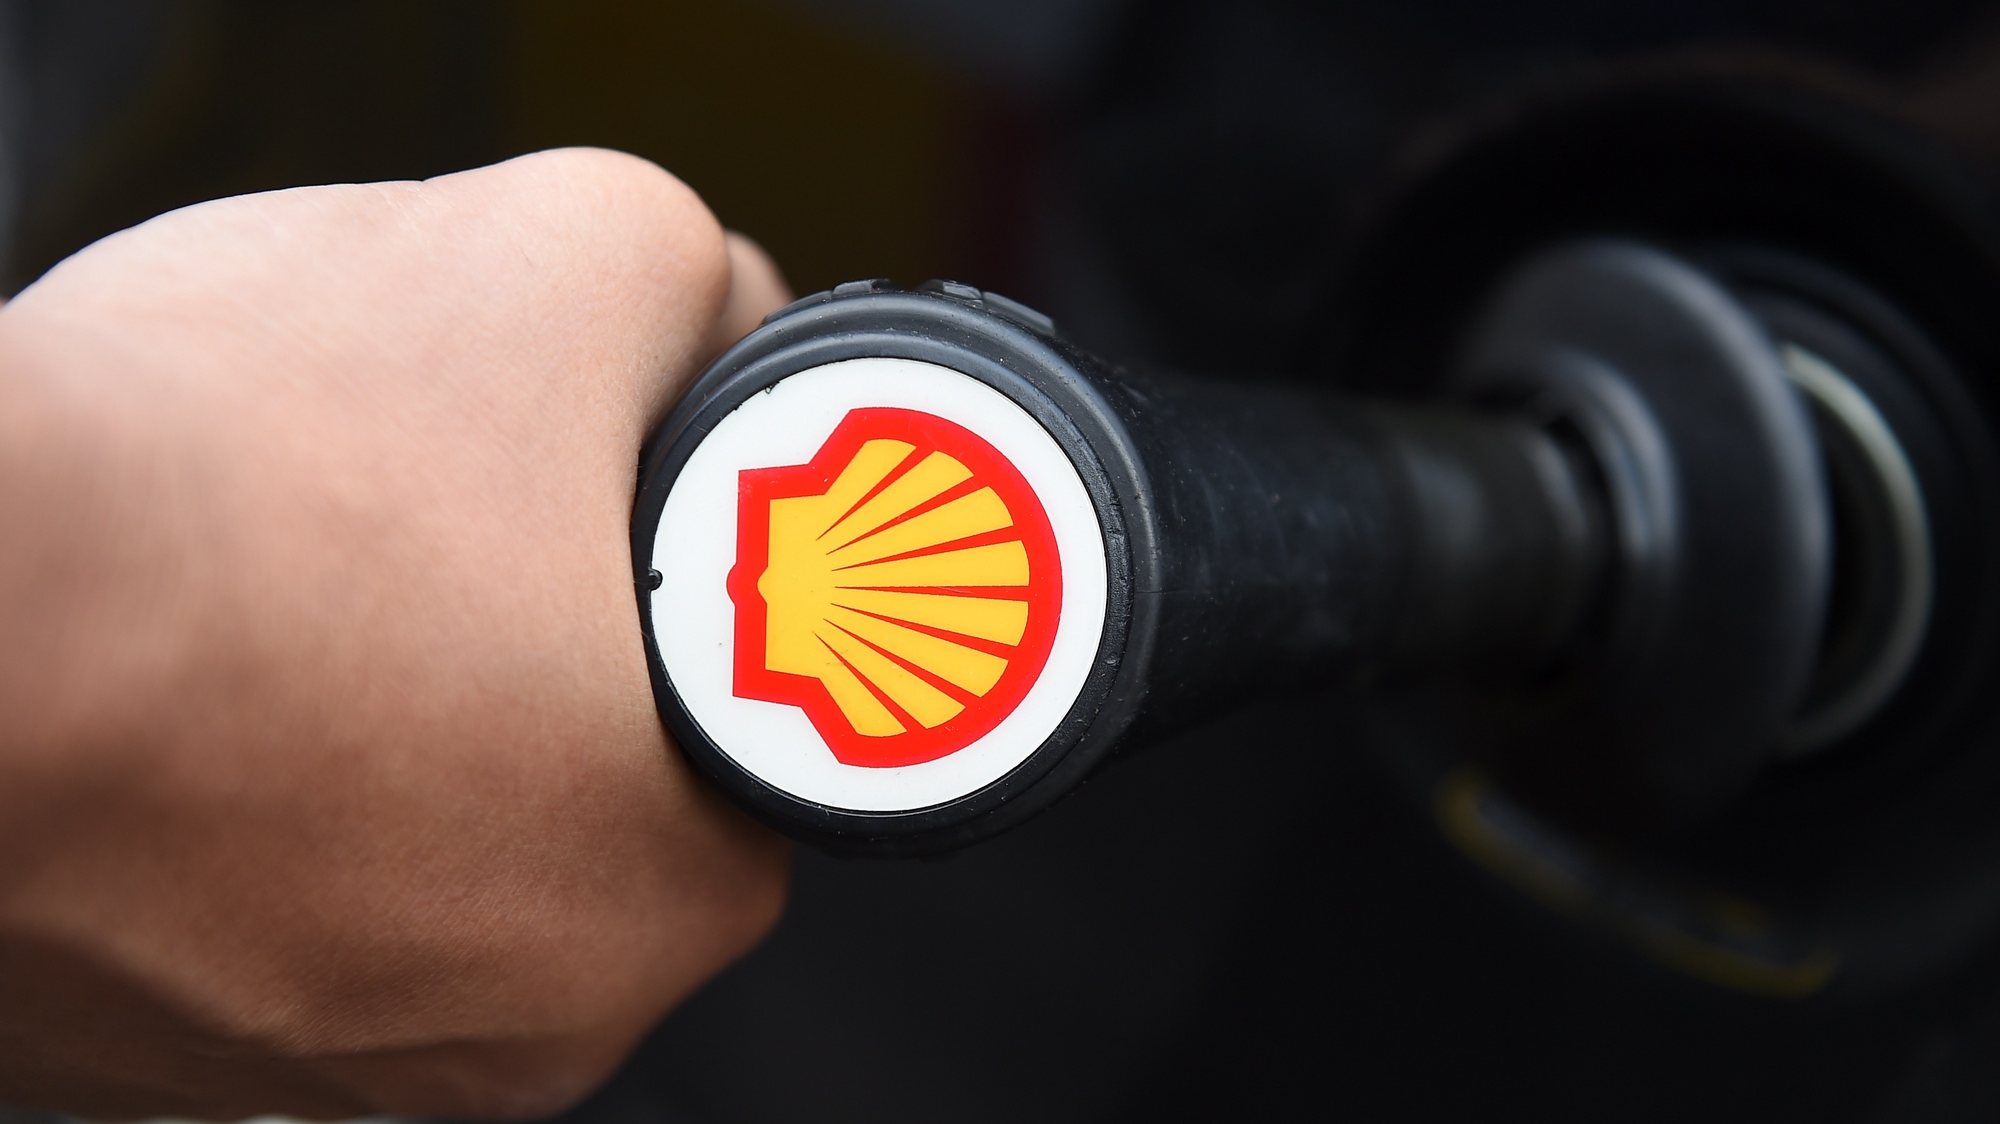 epa08574035 (FILE) - A customer fills his tank at a Shell station in London, England, 08 April 2015 (reissued 30 July 2020). Shell, that in 2nd quarter 2019 made a 3.5 billion USD profit, on 30 July 2020 released their 2nd quarter results 2020 saying they suffered a loss of 18.4 billion USD. Part of the loss was due to low fuel prices as Coronavirus-pandemic hit the demand around the globe  EPA/ANDY RAIN *** Local Caption *** 56055625